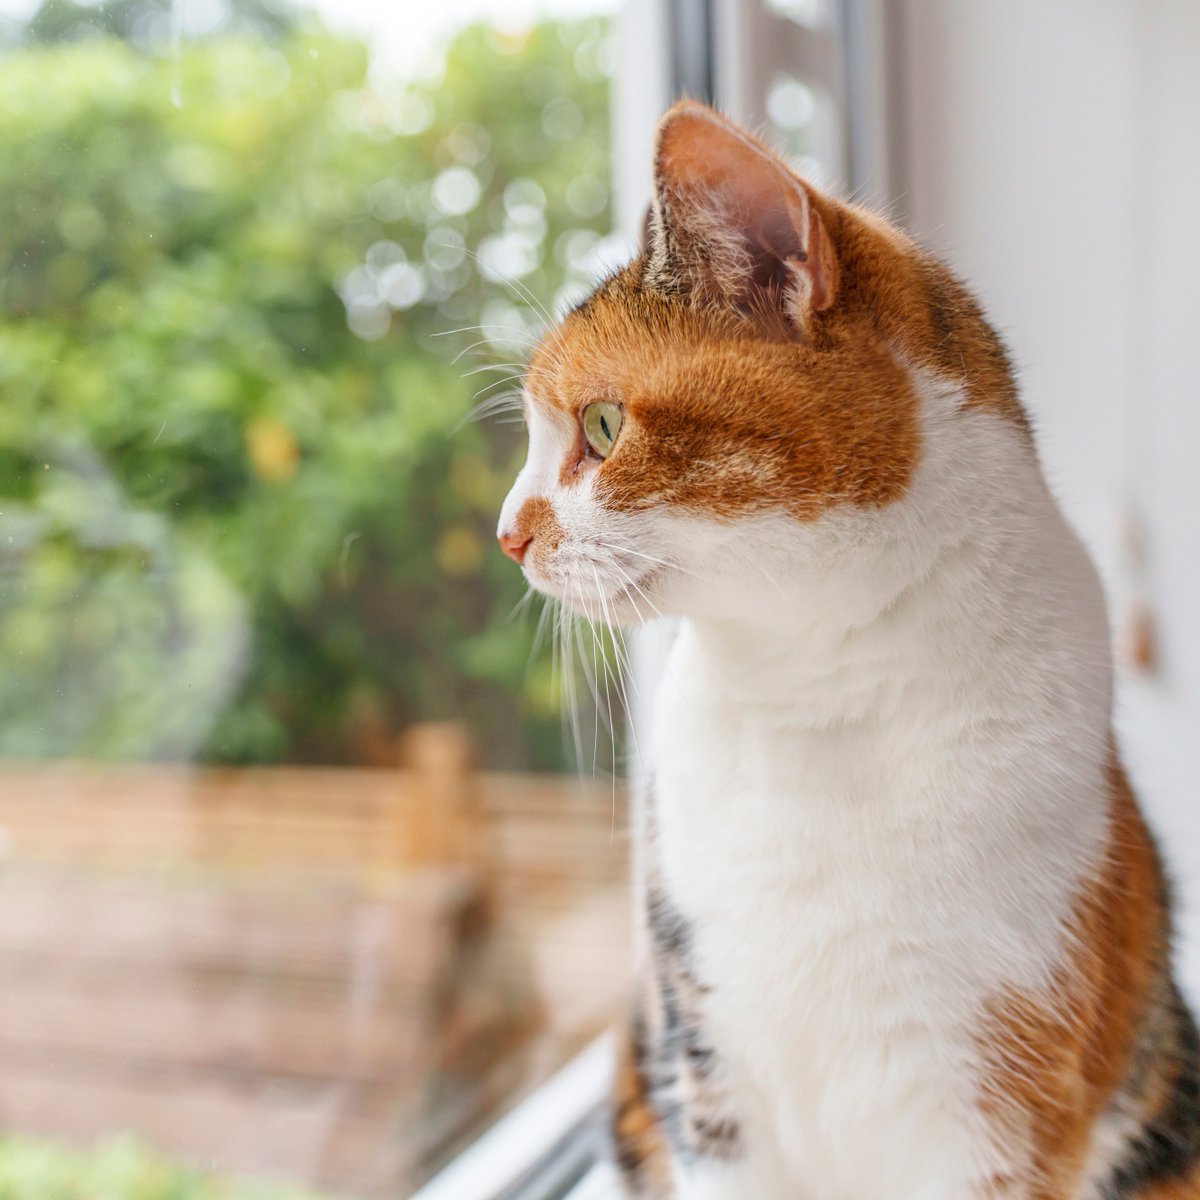 Ever seen your cat ‘talking’ to the birds outside with chattering, chirping or tweeting noises? Find out what cats are saying when they talk to birds here: spr.ly/WhyDoCatsTalkT… 🐦